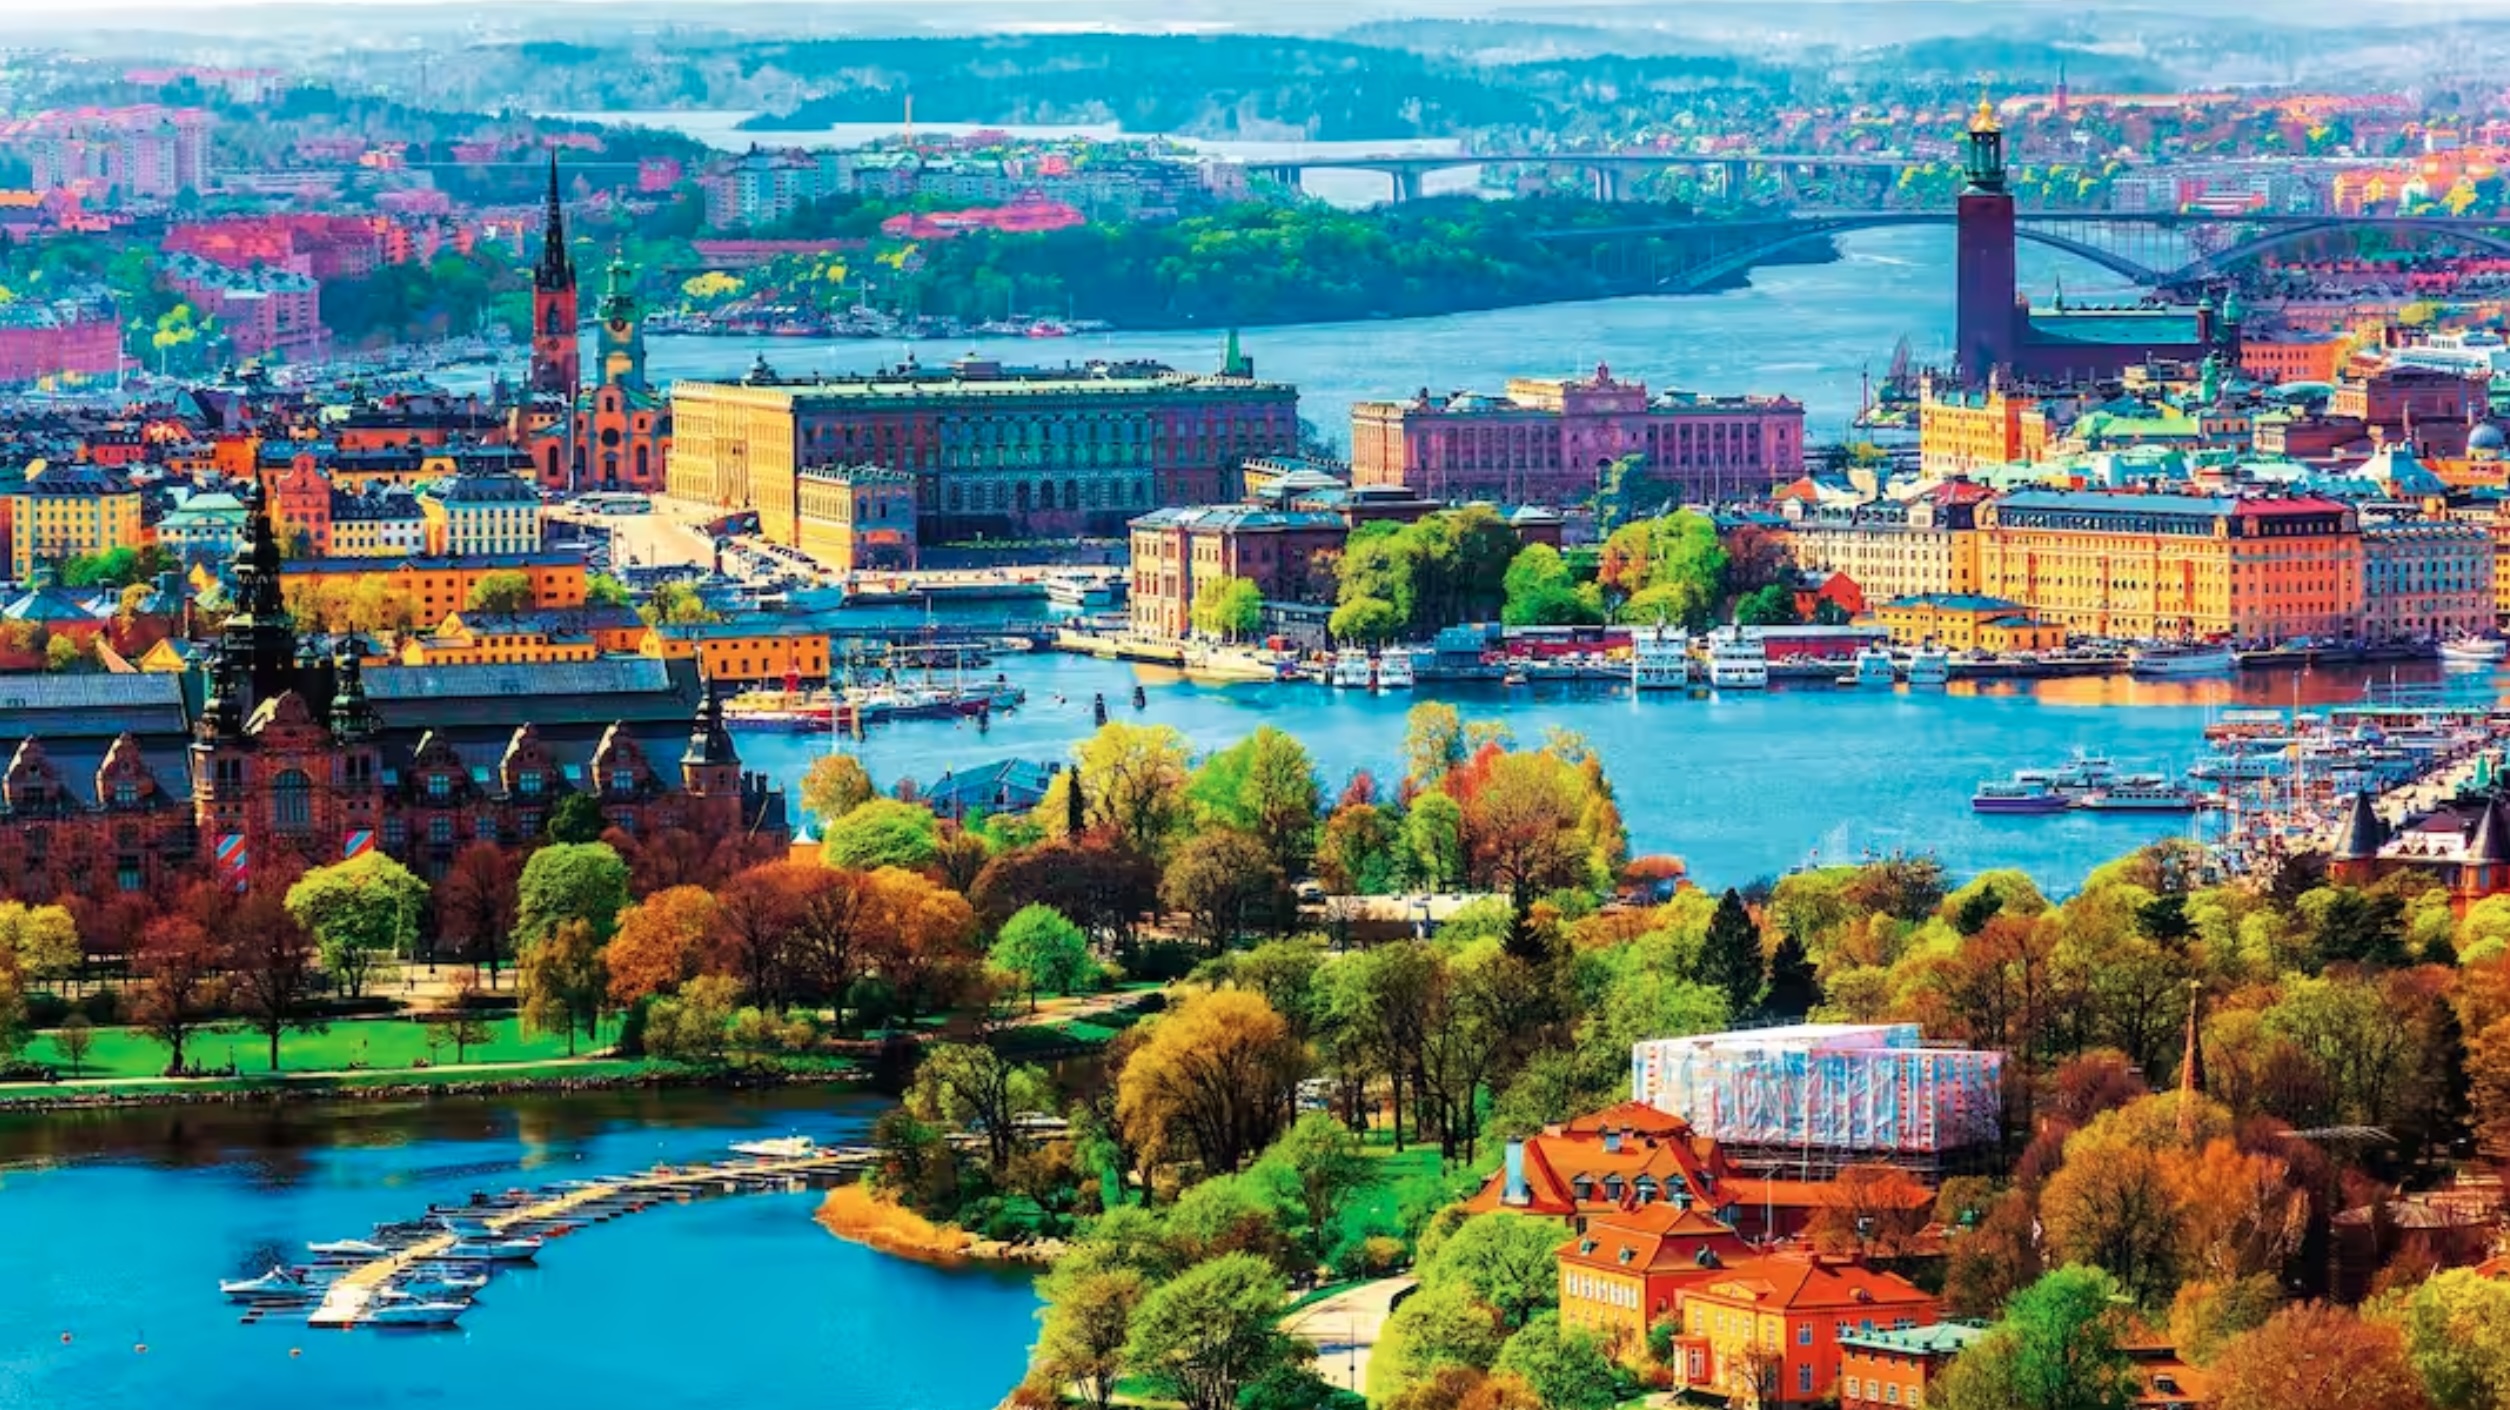 aerial view of Old Town, Stockholm, Sweden